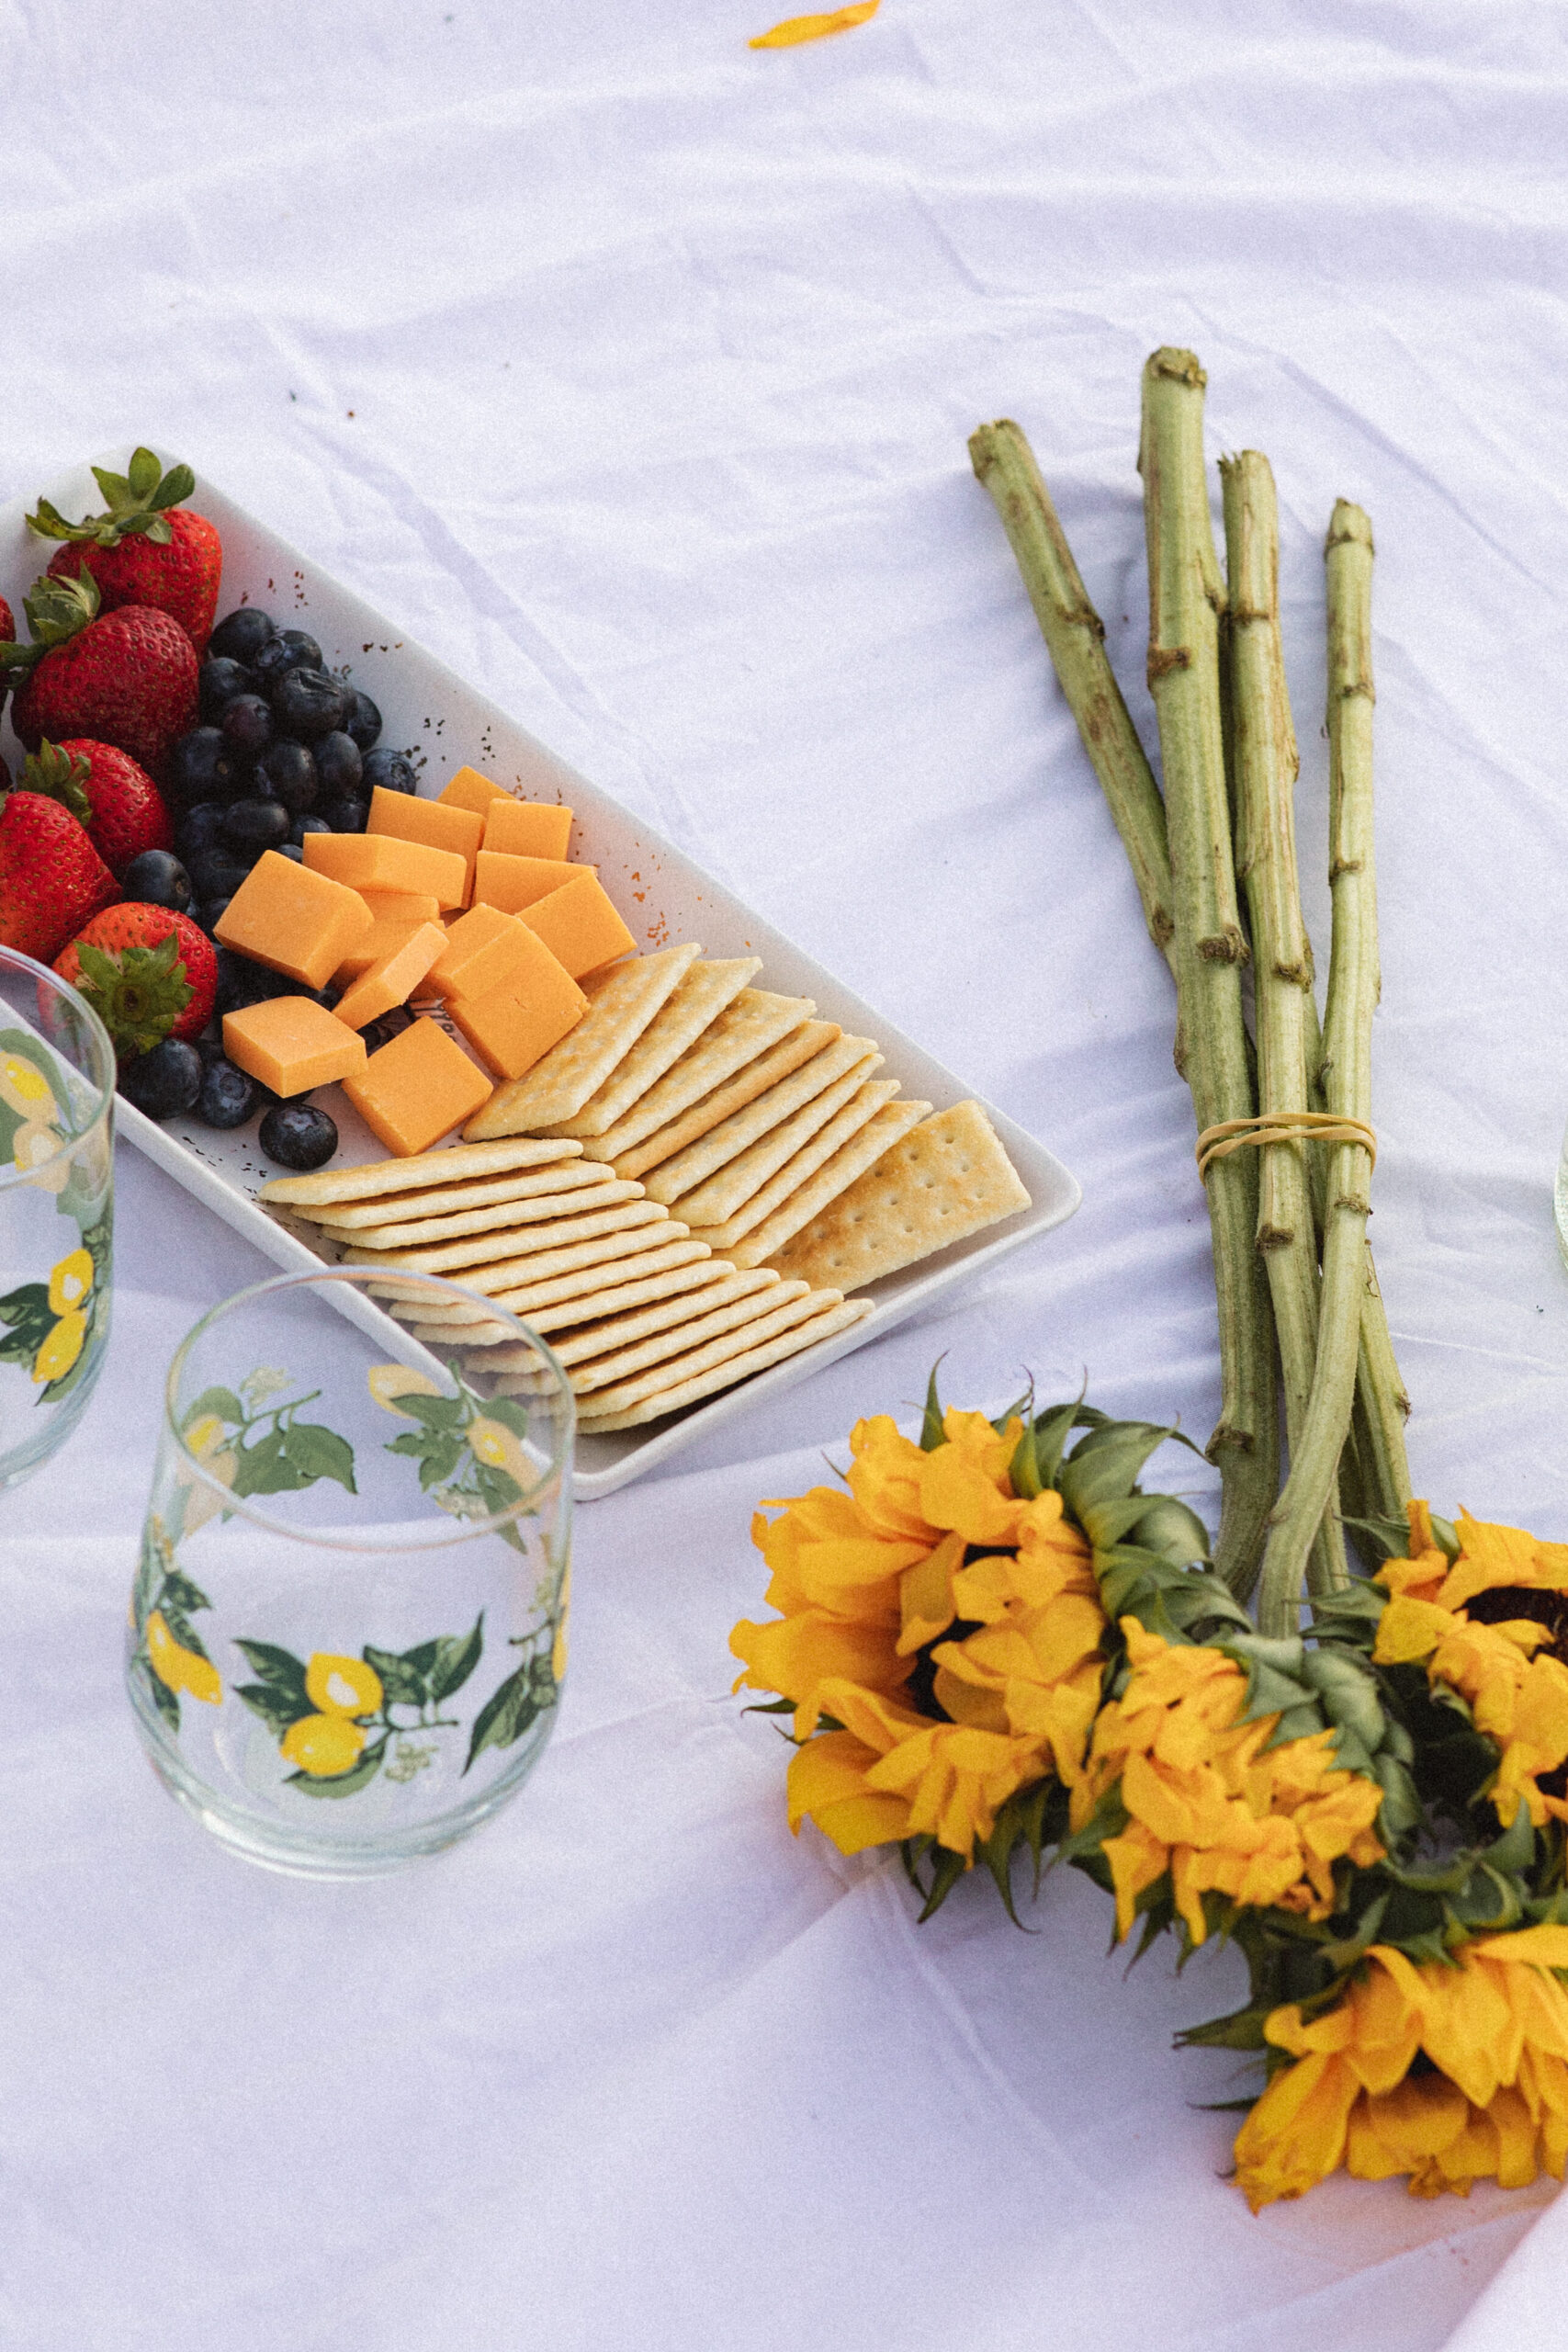 Close-up of a picnic spread featuring crackers, cheese, strawberries, and sunflowers on a white blanket.